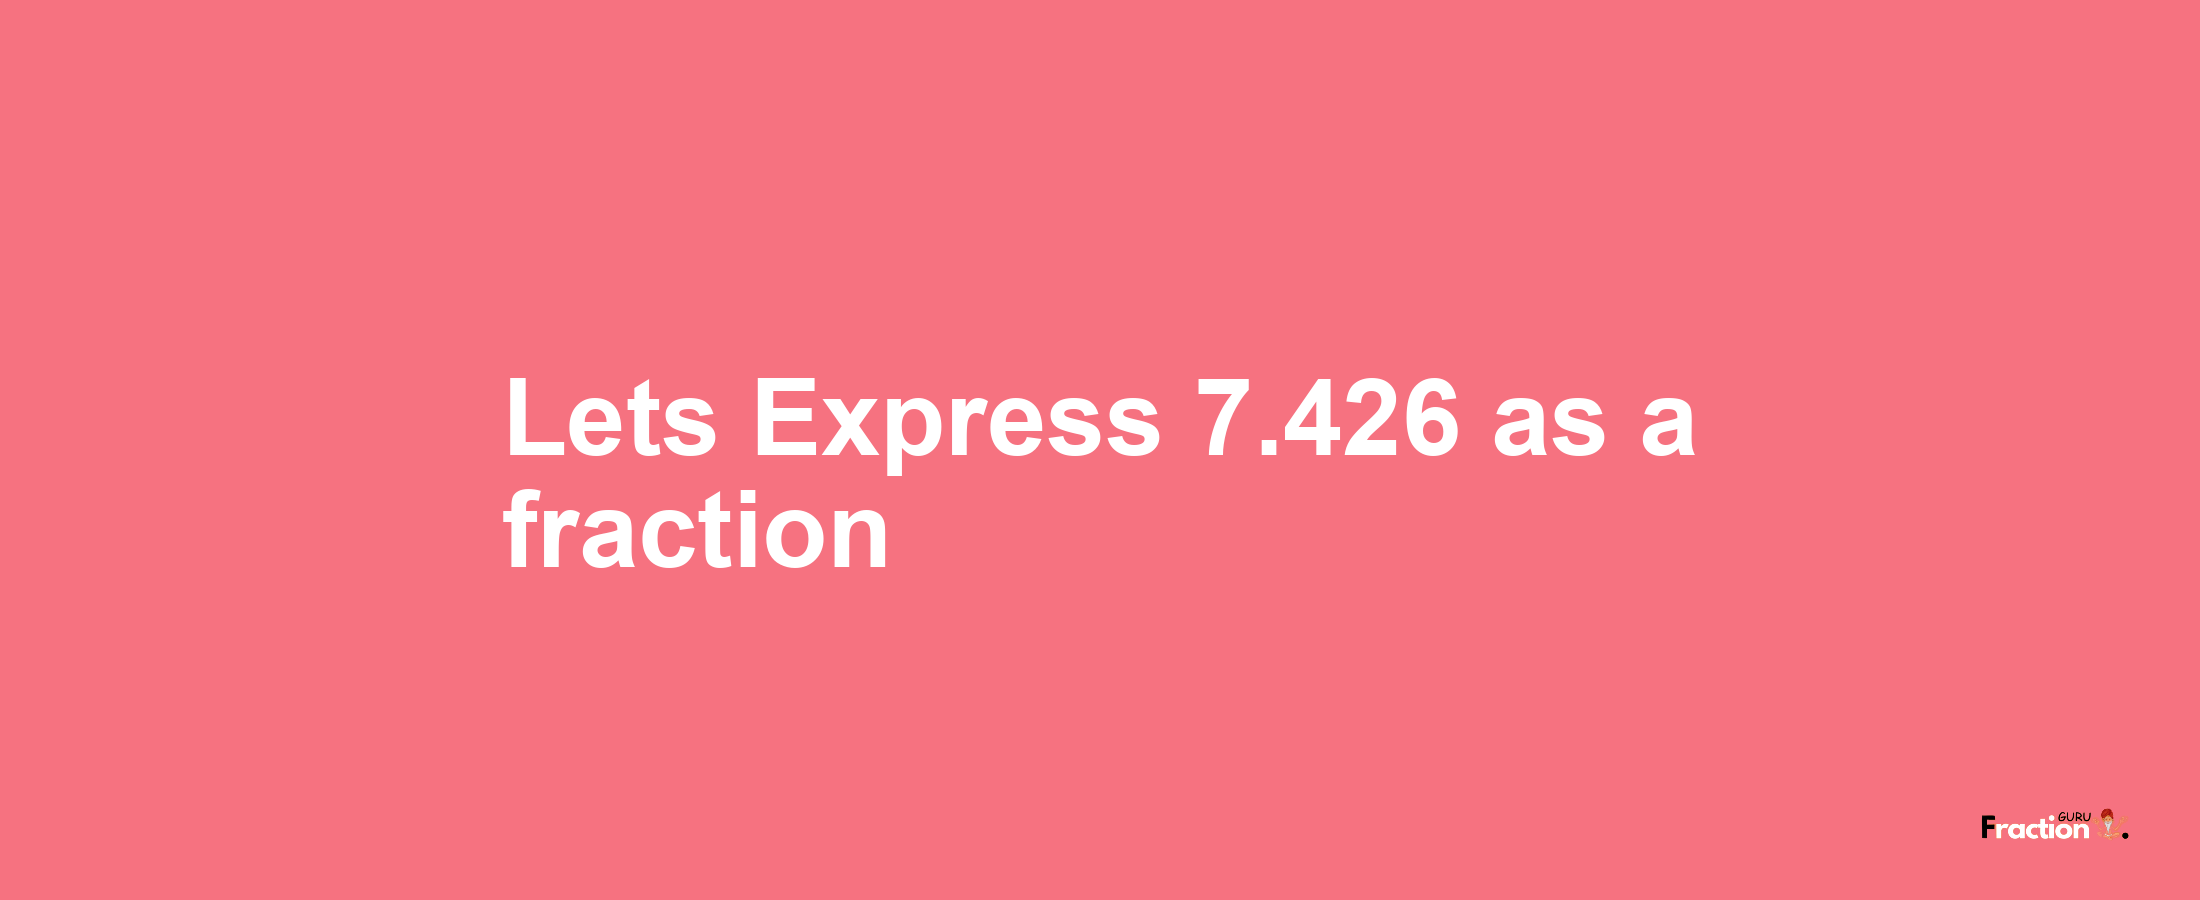 Lets Express 7.426 as afraction